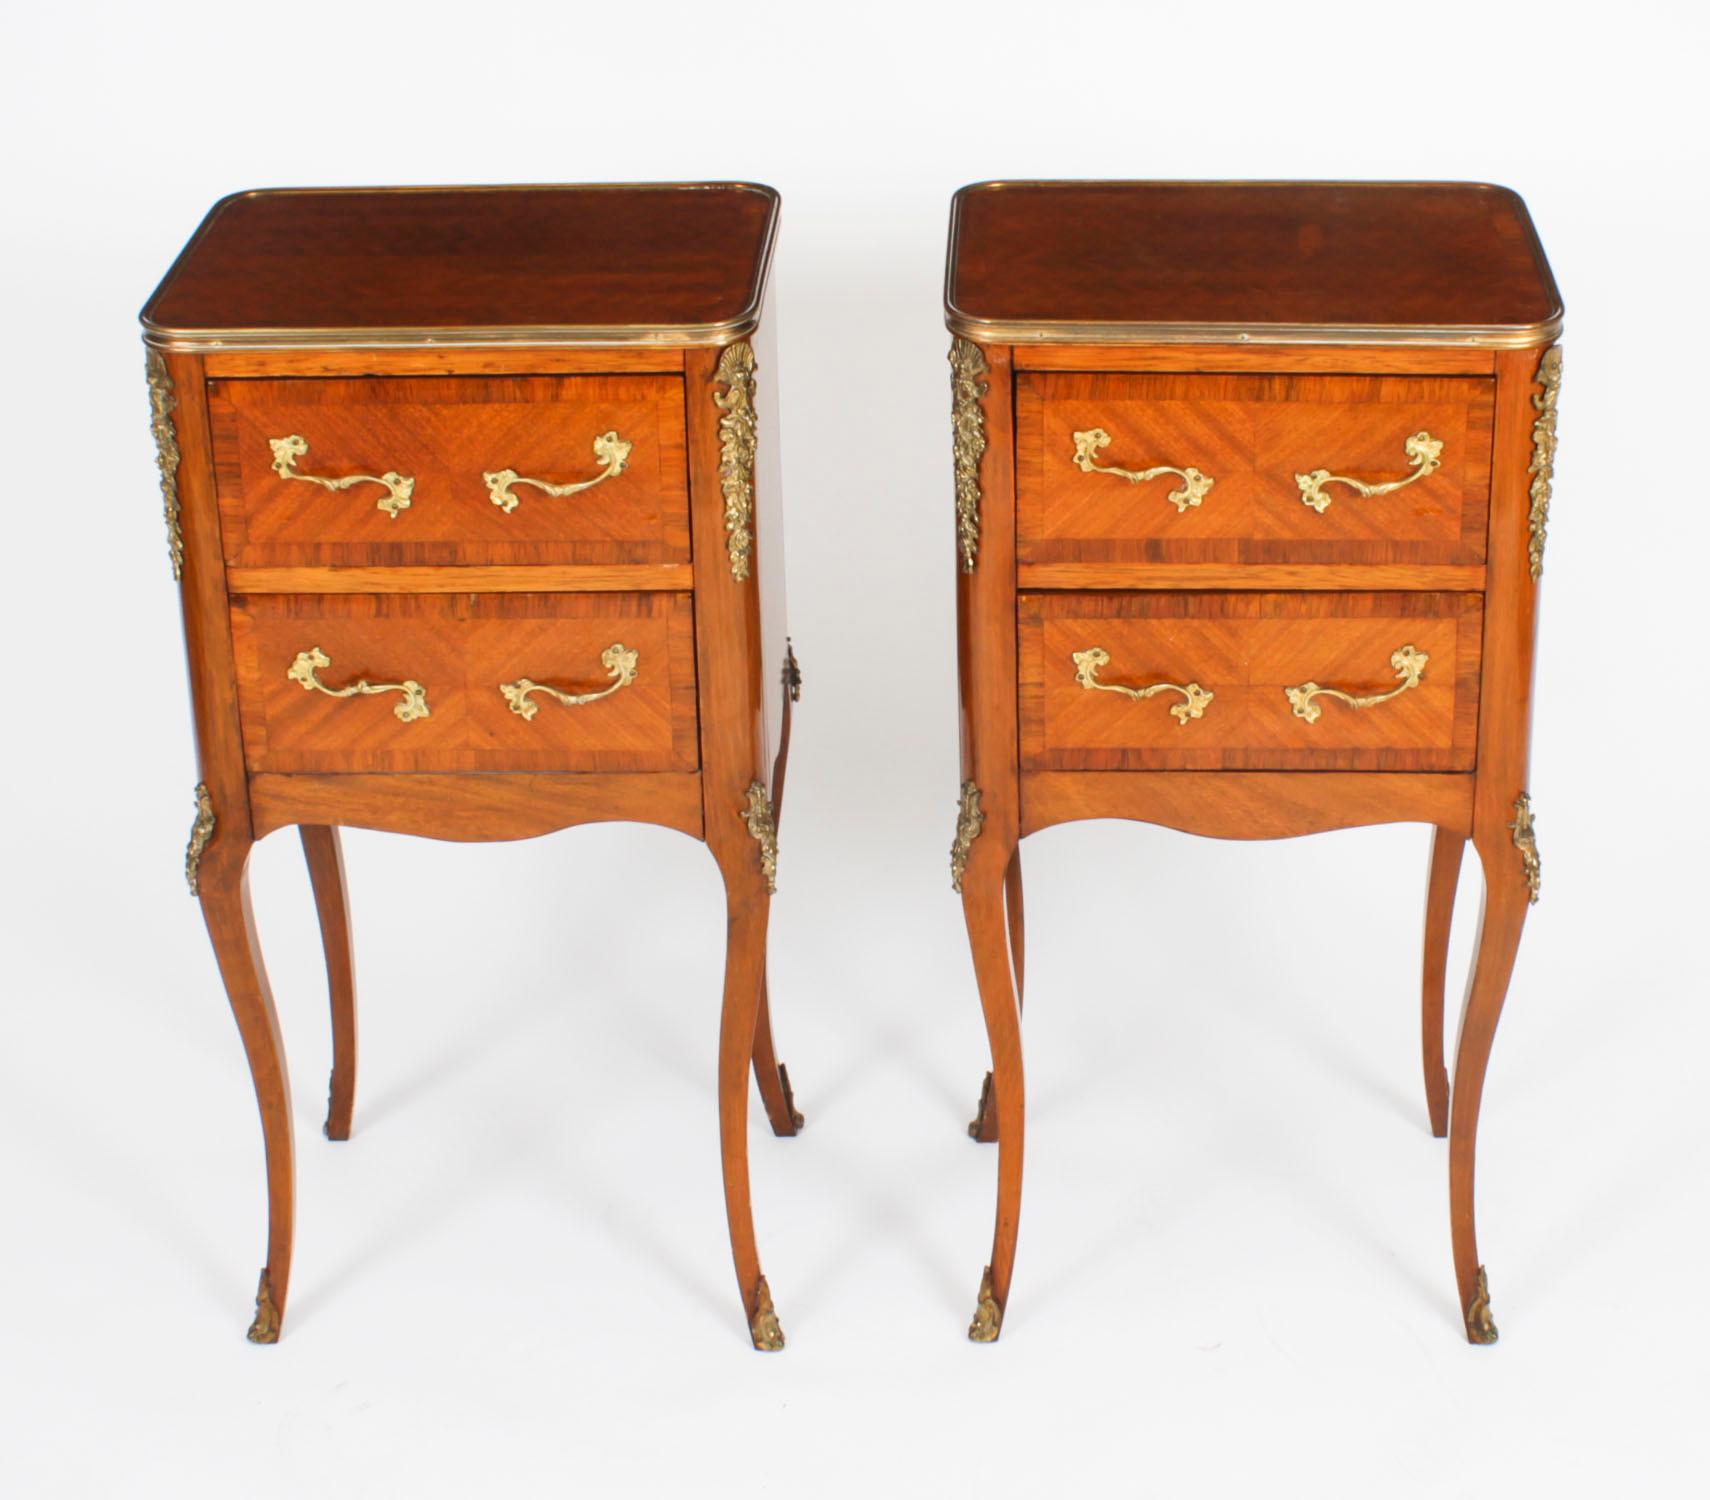 This is an elegant pair of Antique French Bois de Violette and ormolu mounted Louis XVI Revival bedside cabinets, circa 1870 in date.
 
They feature shaped ormolu banded rectangular tops with parquetry decoration. They each have two drawers that are